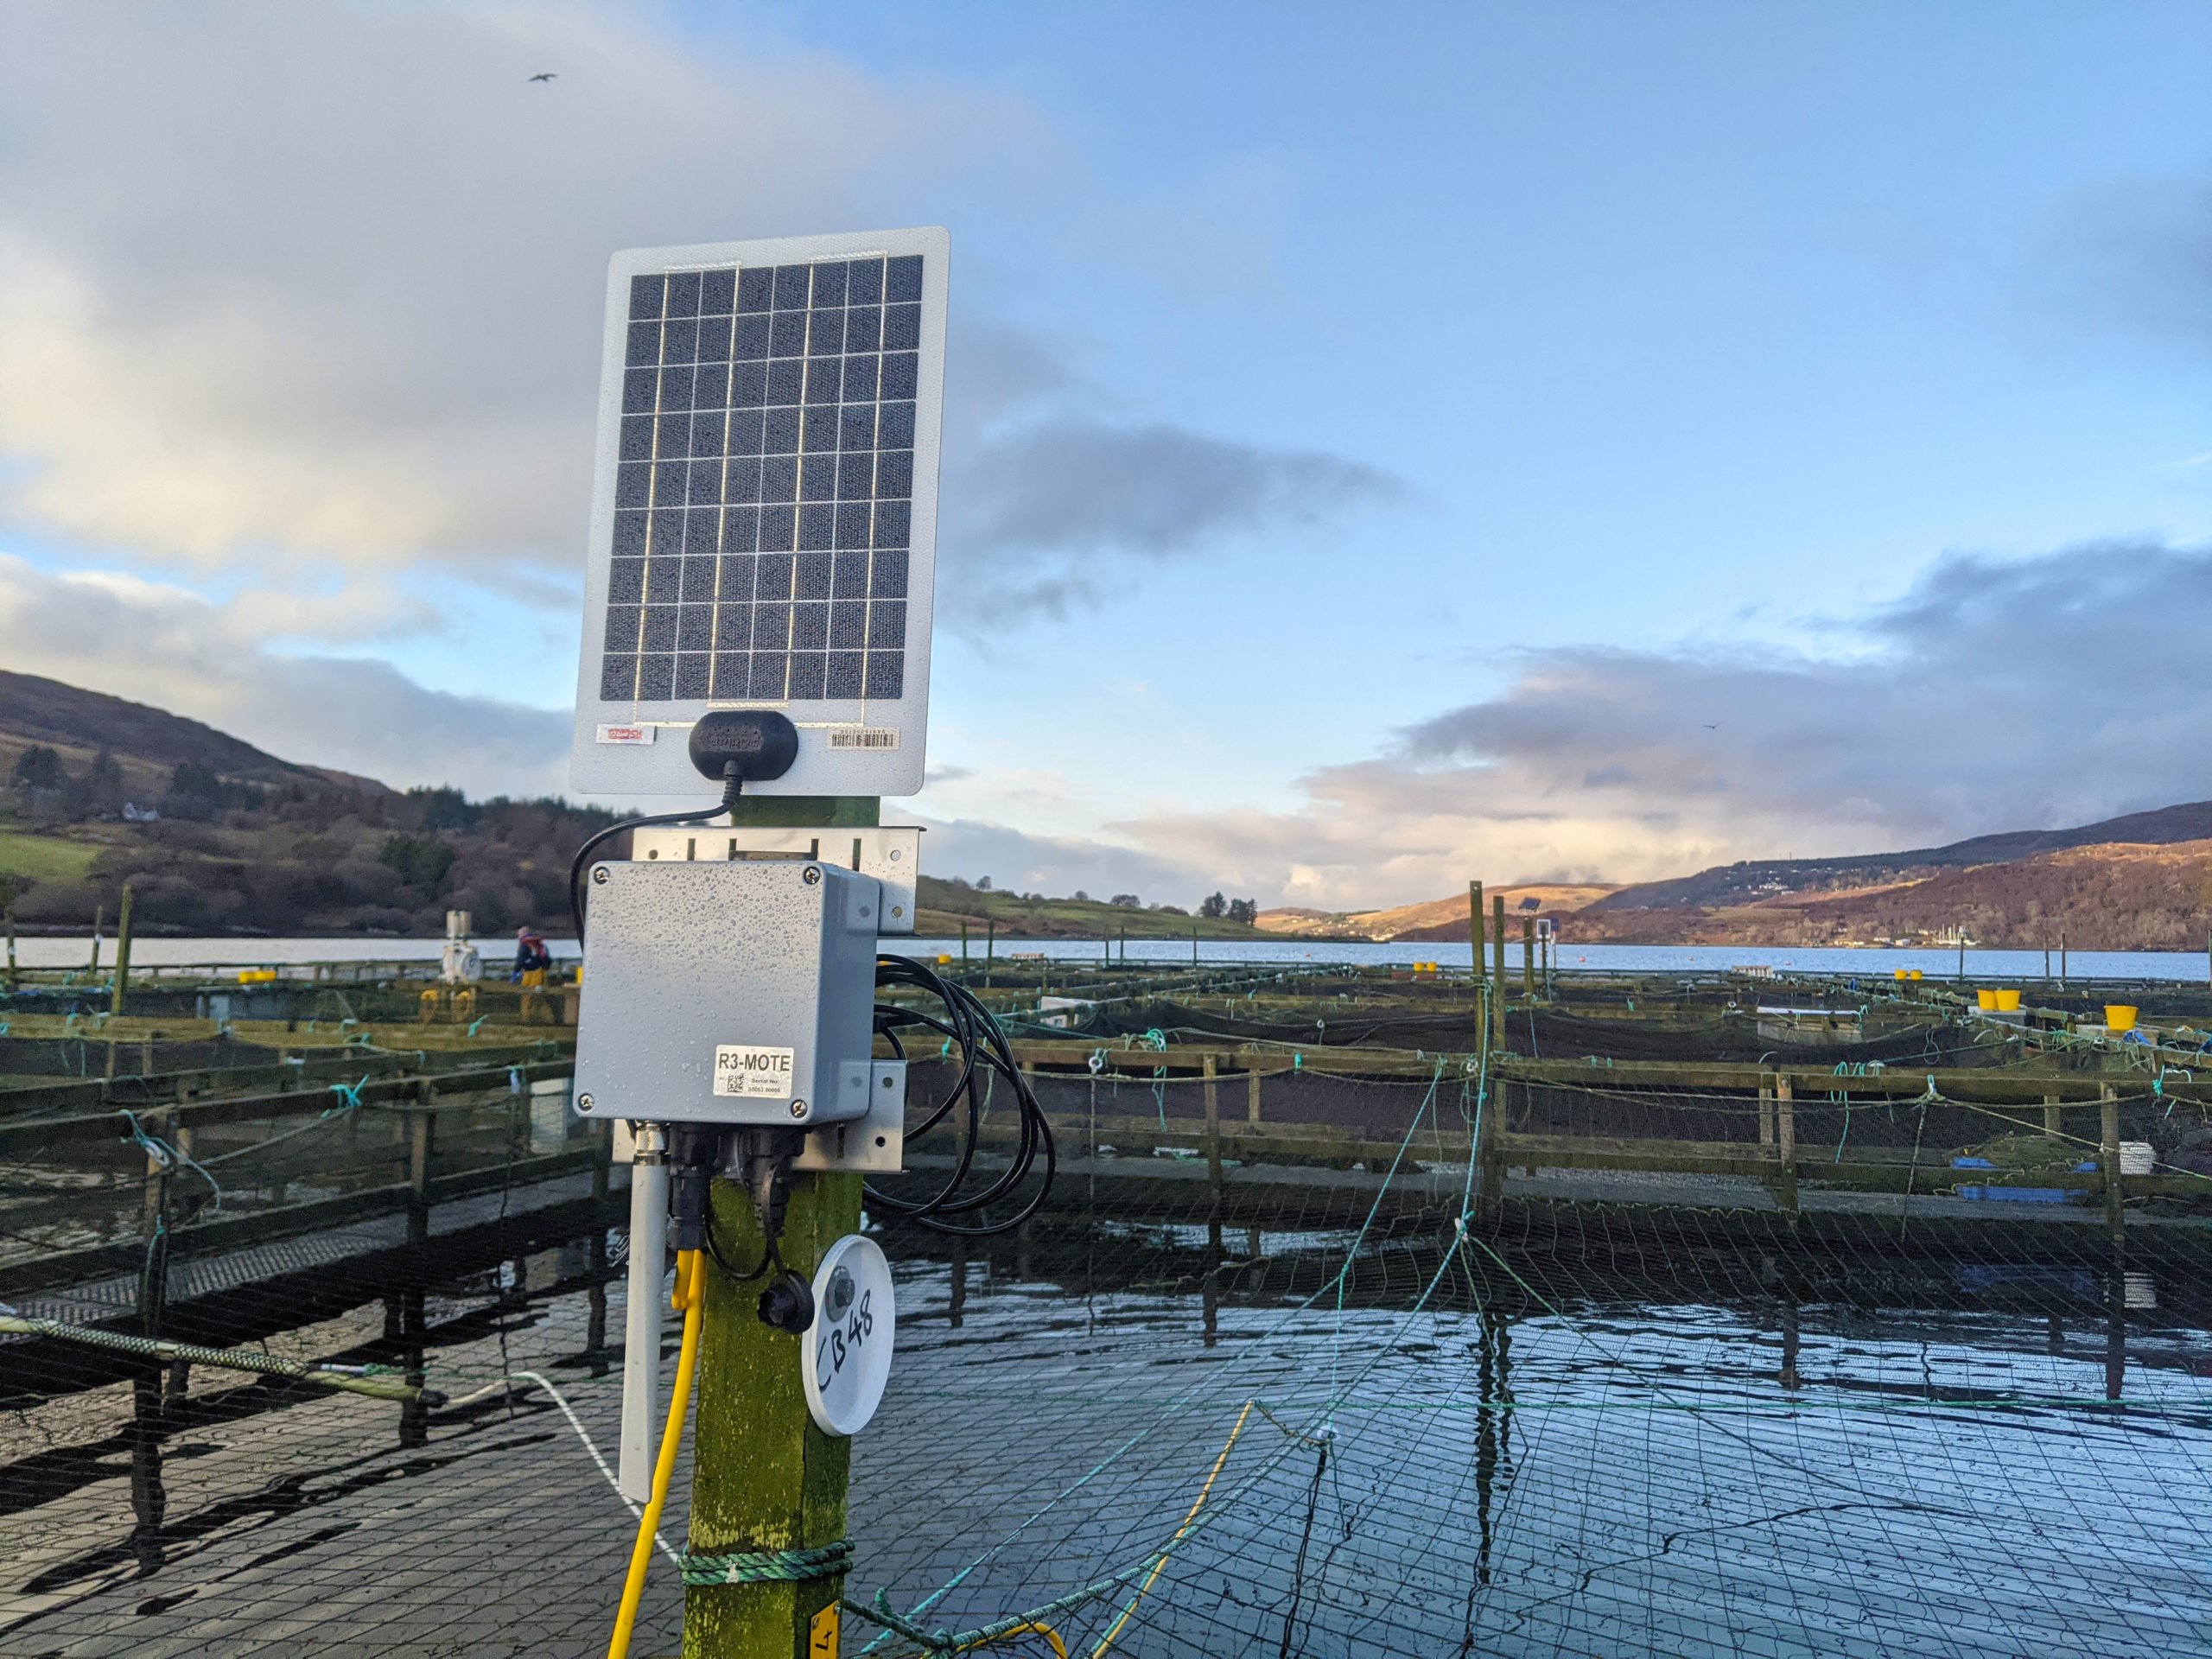 Krucial Connected Seafarm to launch at aquaculture uk and help unlock digitisation for the aquaculture industry